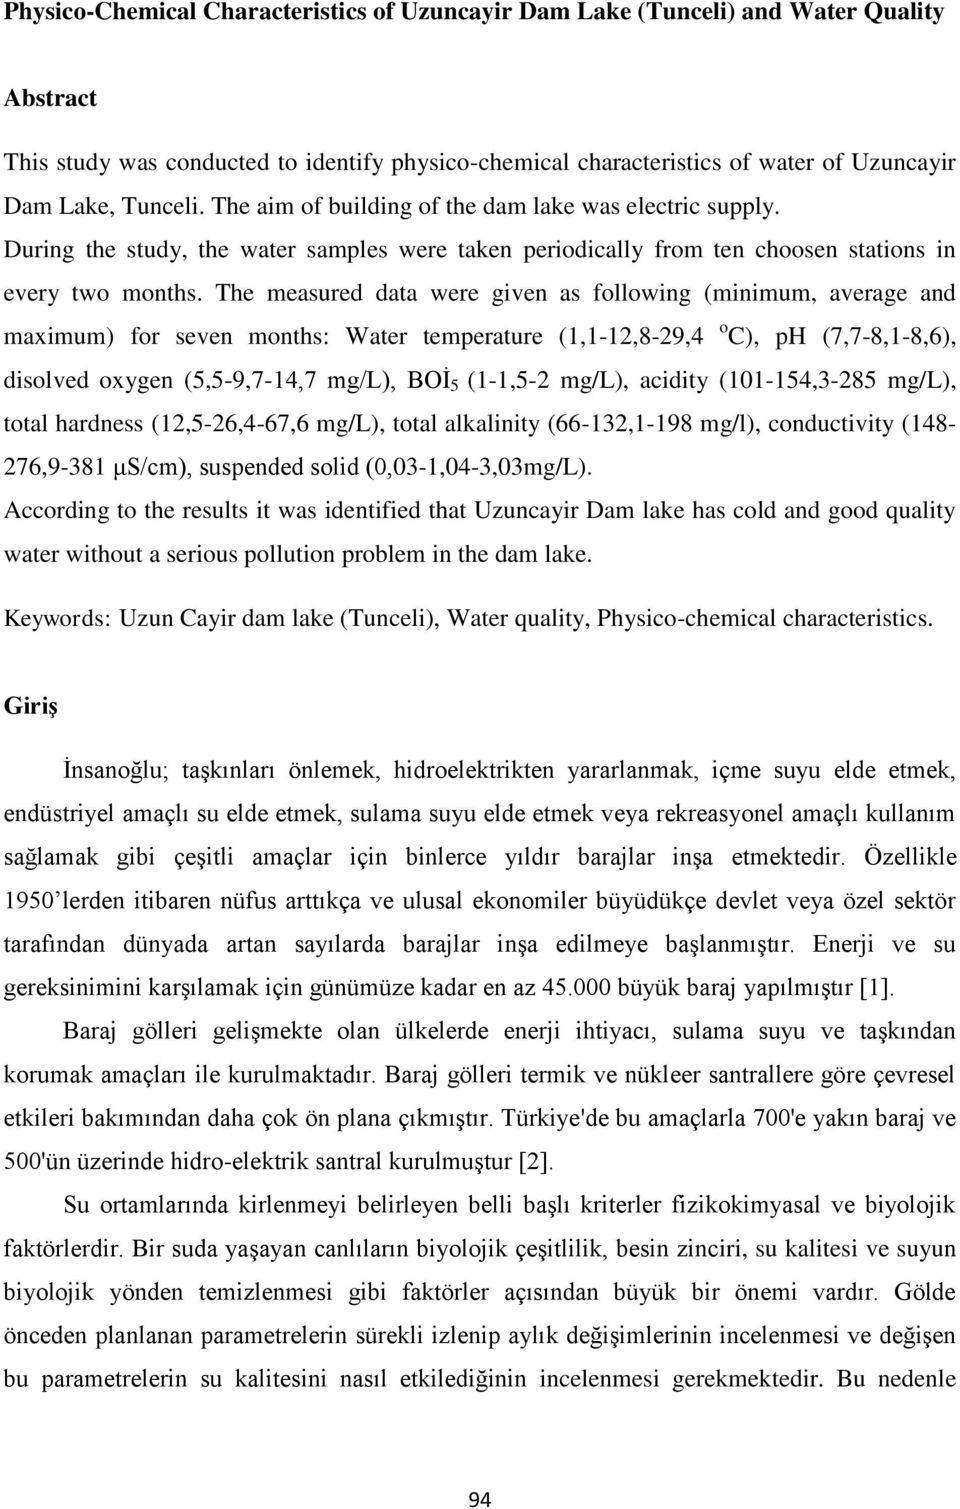 The measured data were given as following (minimum, average and maximum) for seven months: Water temperature (1,1-12,8-29,4 o C), ph (7,7-8,1-8,6), disolved oxygen (5,5-9,7-14,7 mg/l), BOİ 5 (1-1,5-2